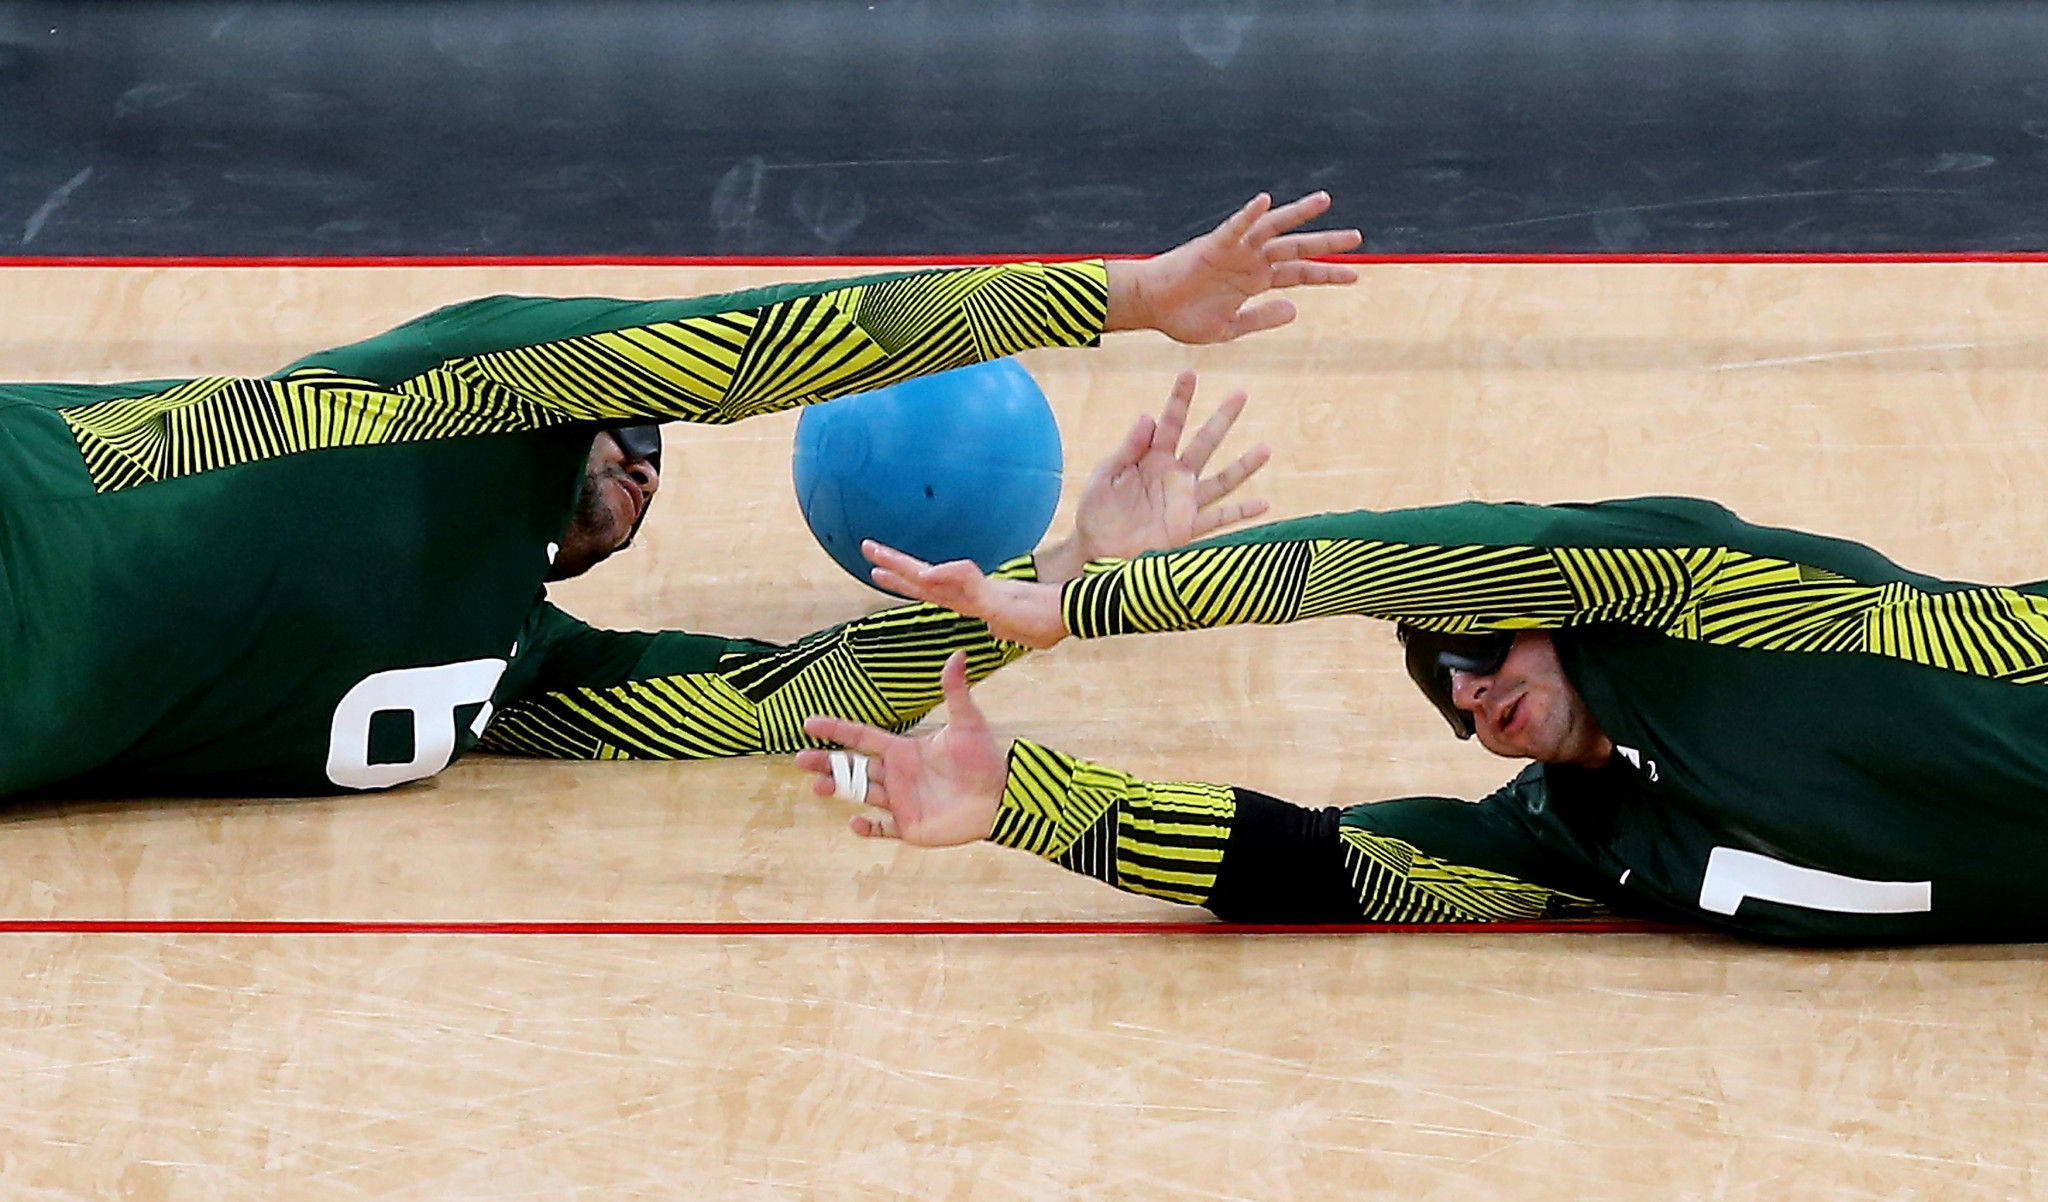 Cape Coast in Ghana to host 2021 African Goalball Championships